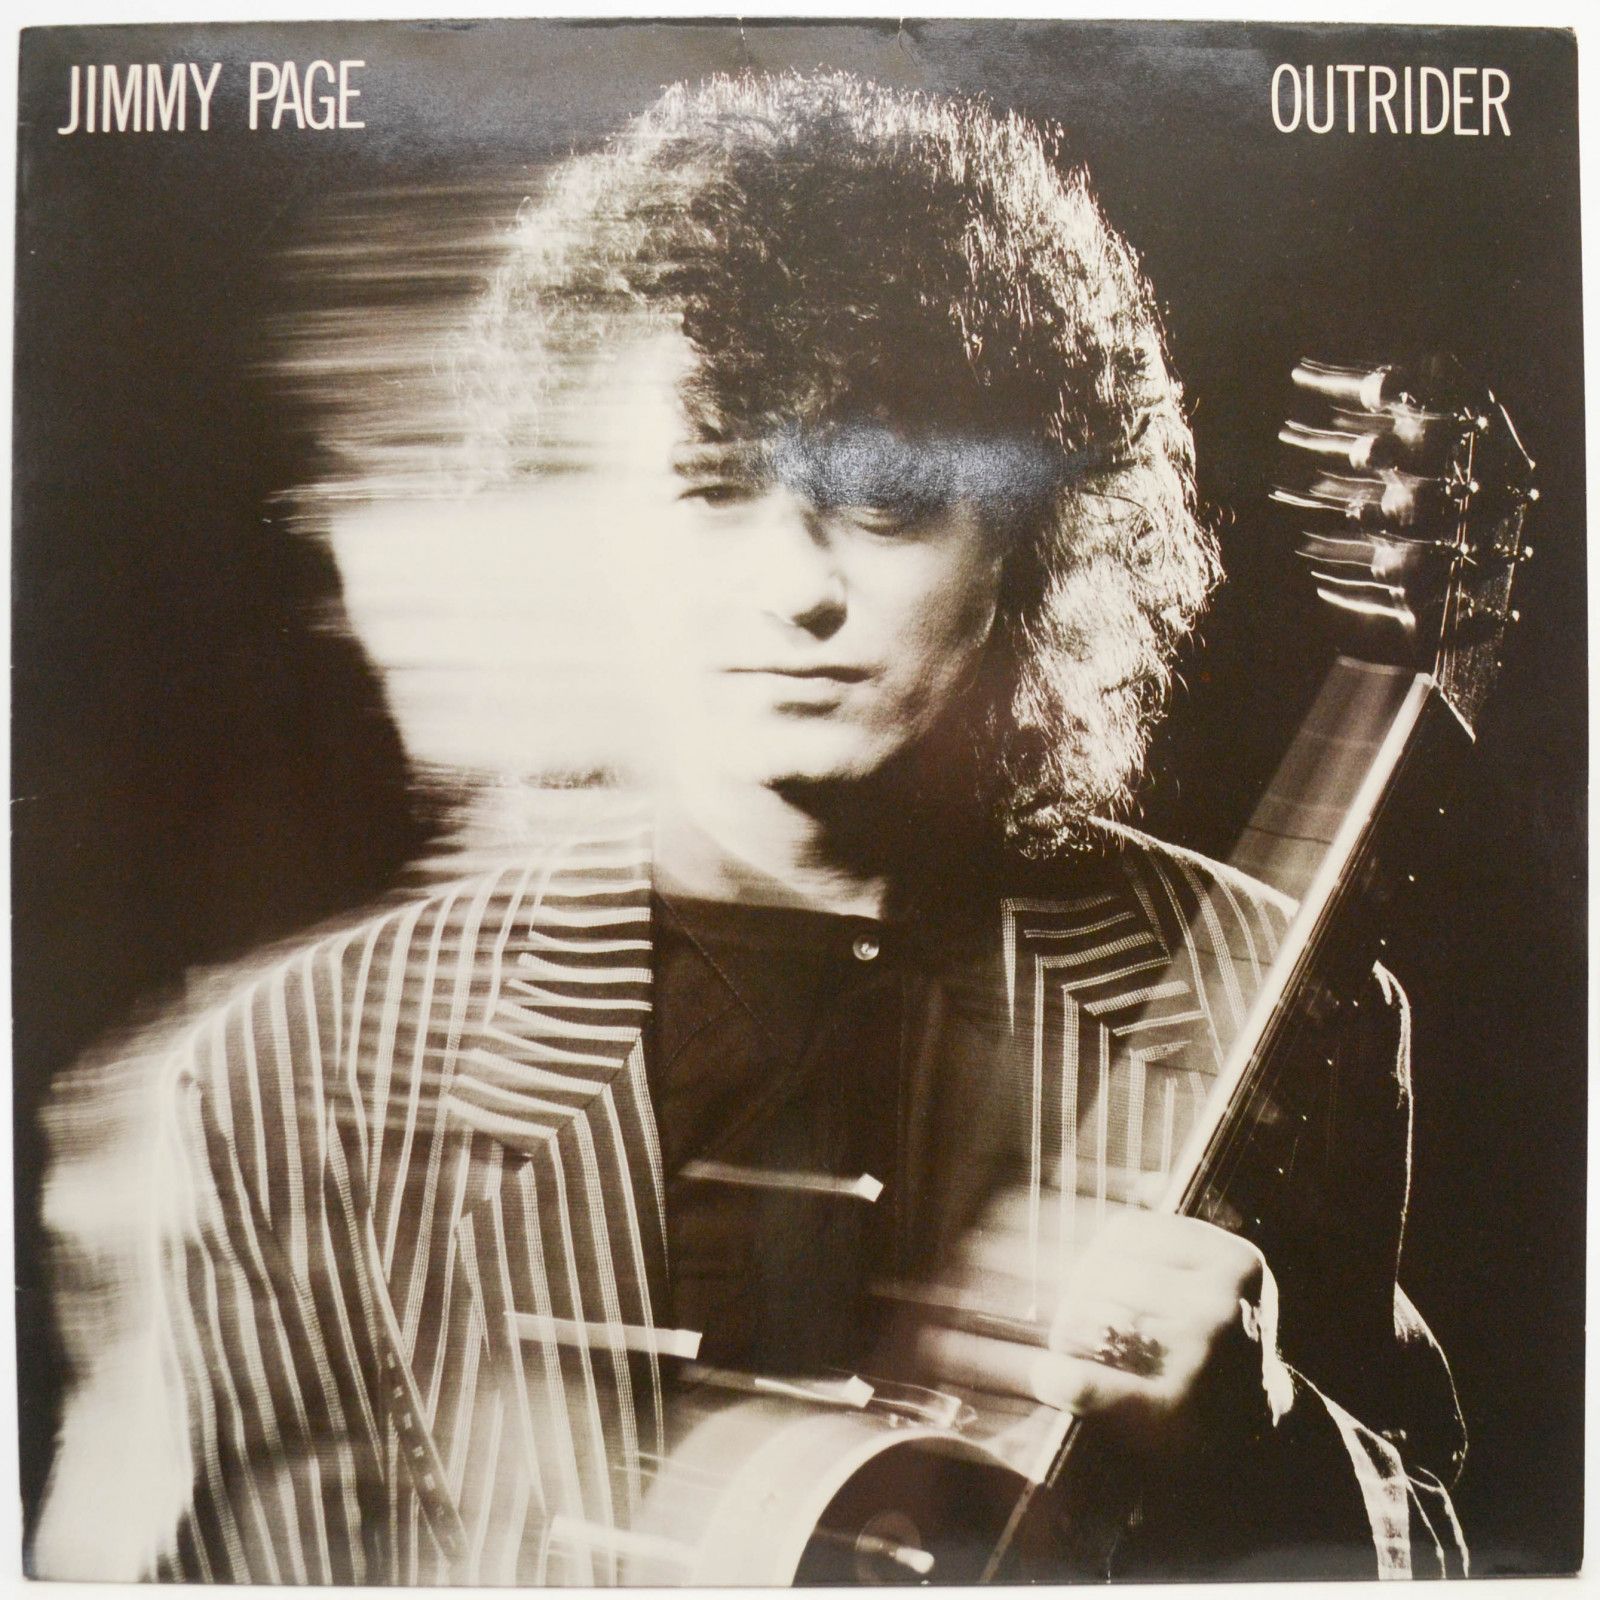 Jimmy Page — Outrider, 1988